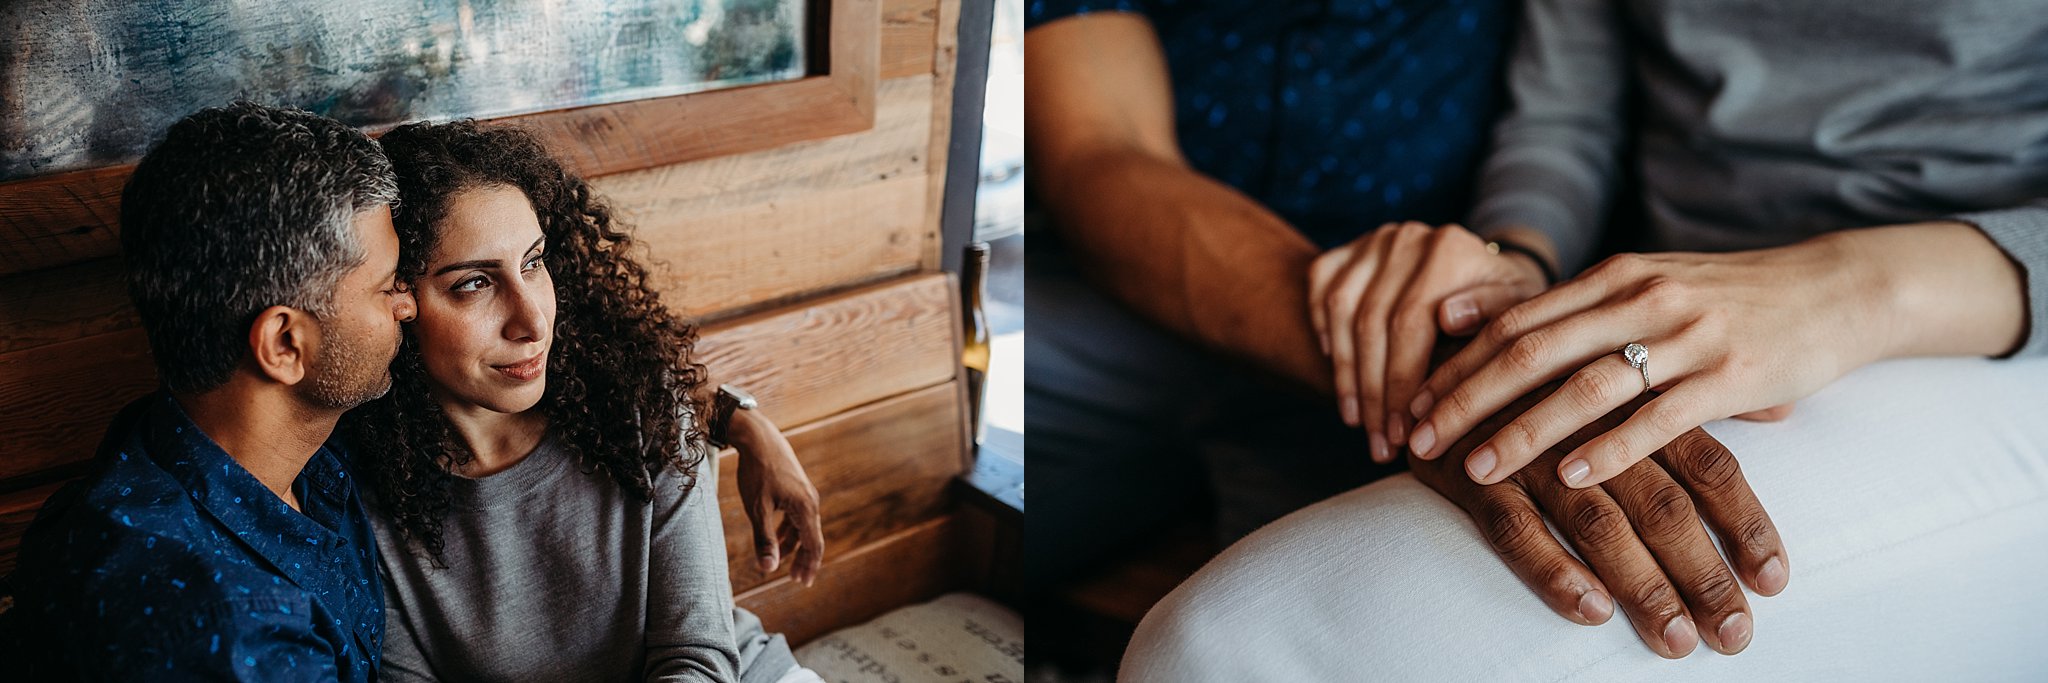 Two side by side images. The first image a couple sits snuggled together on a bench in a wine shop in San Francisco. The second image of the couples hands showcasing the woman's engagement ring in San Francisco.